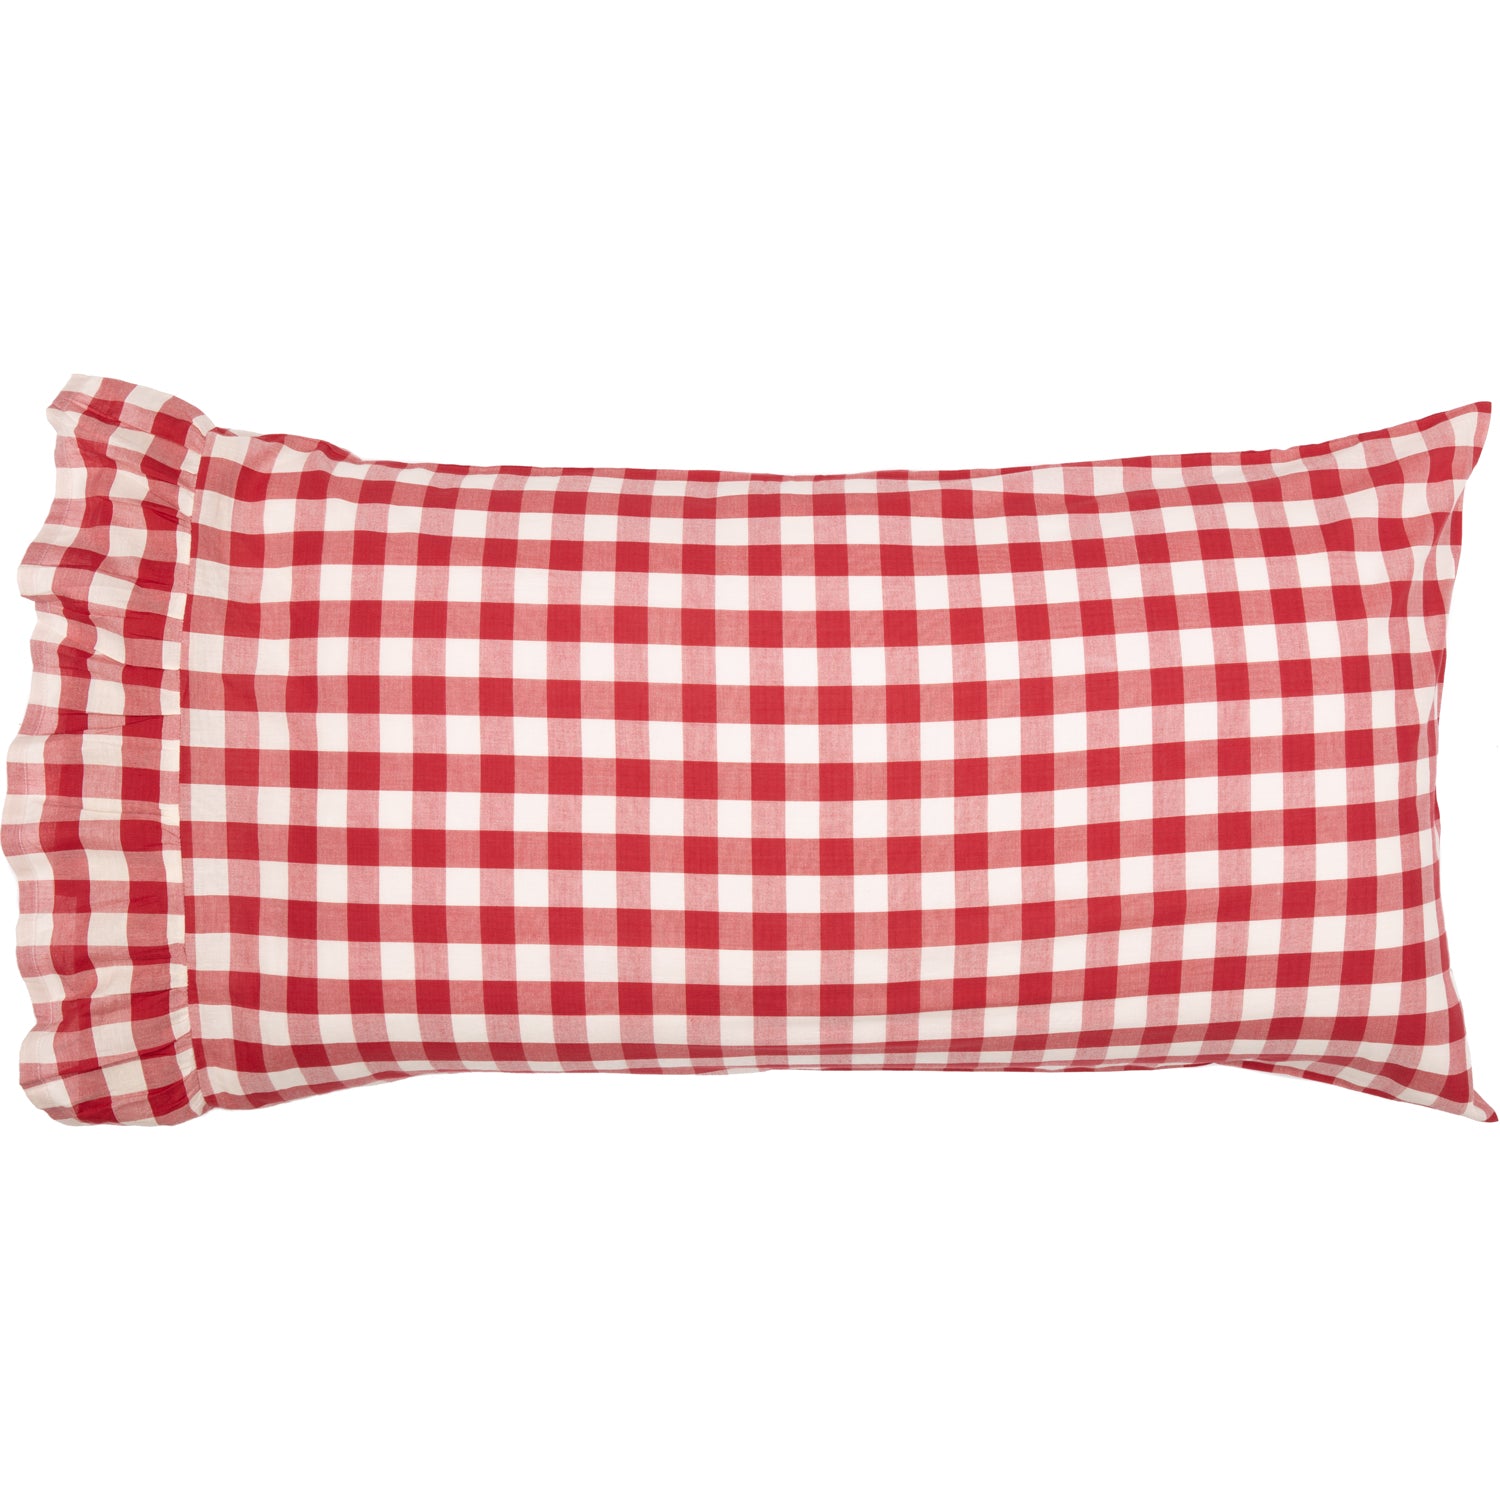 April & Olive Annie Buffalo Red Check King Pillow Case Set of 2 21x36+4 By VHC Brands